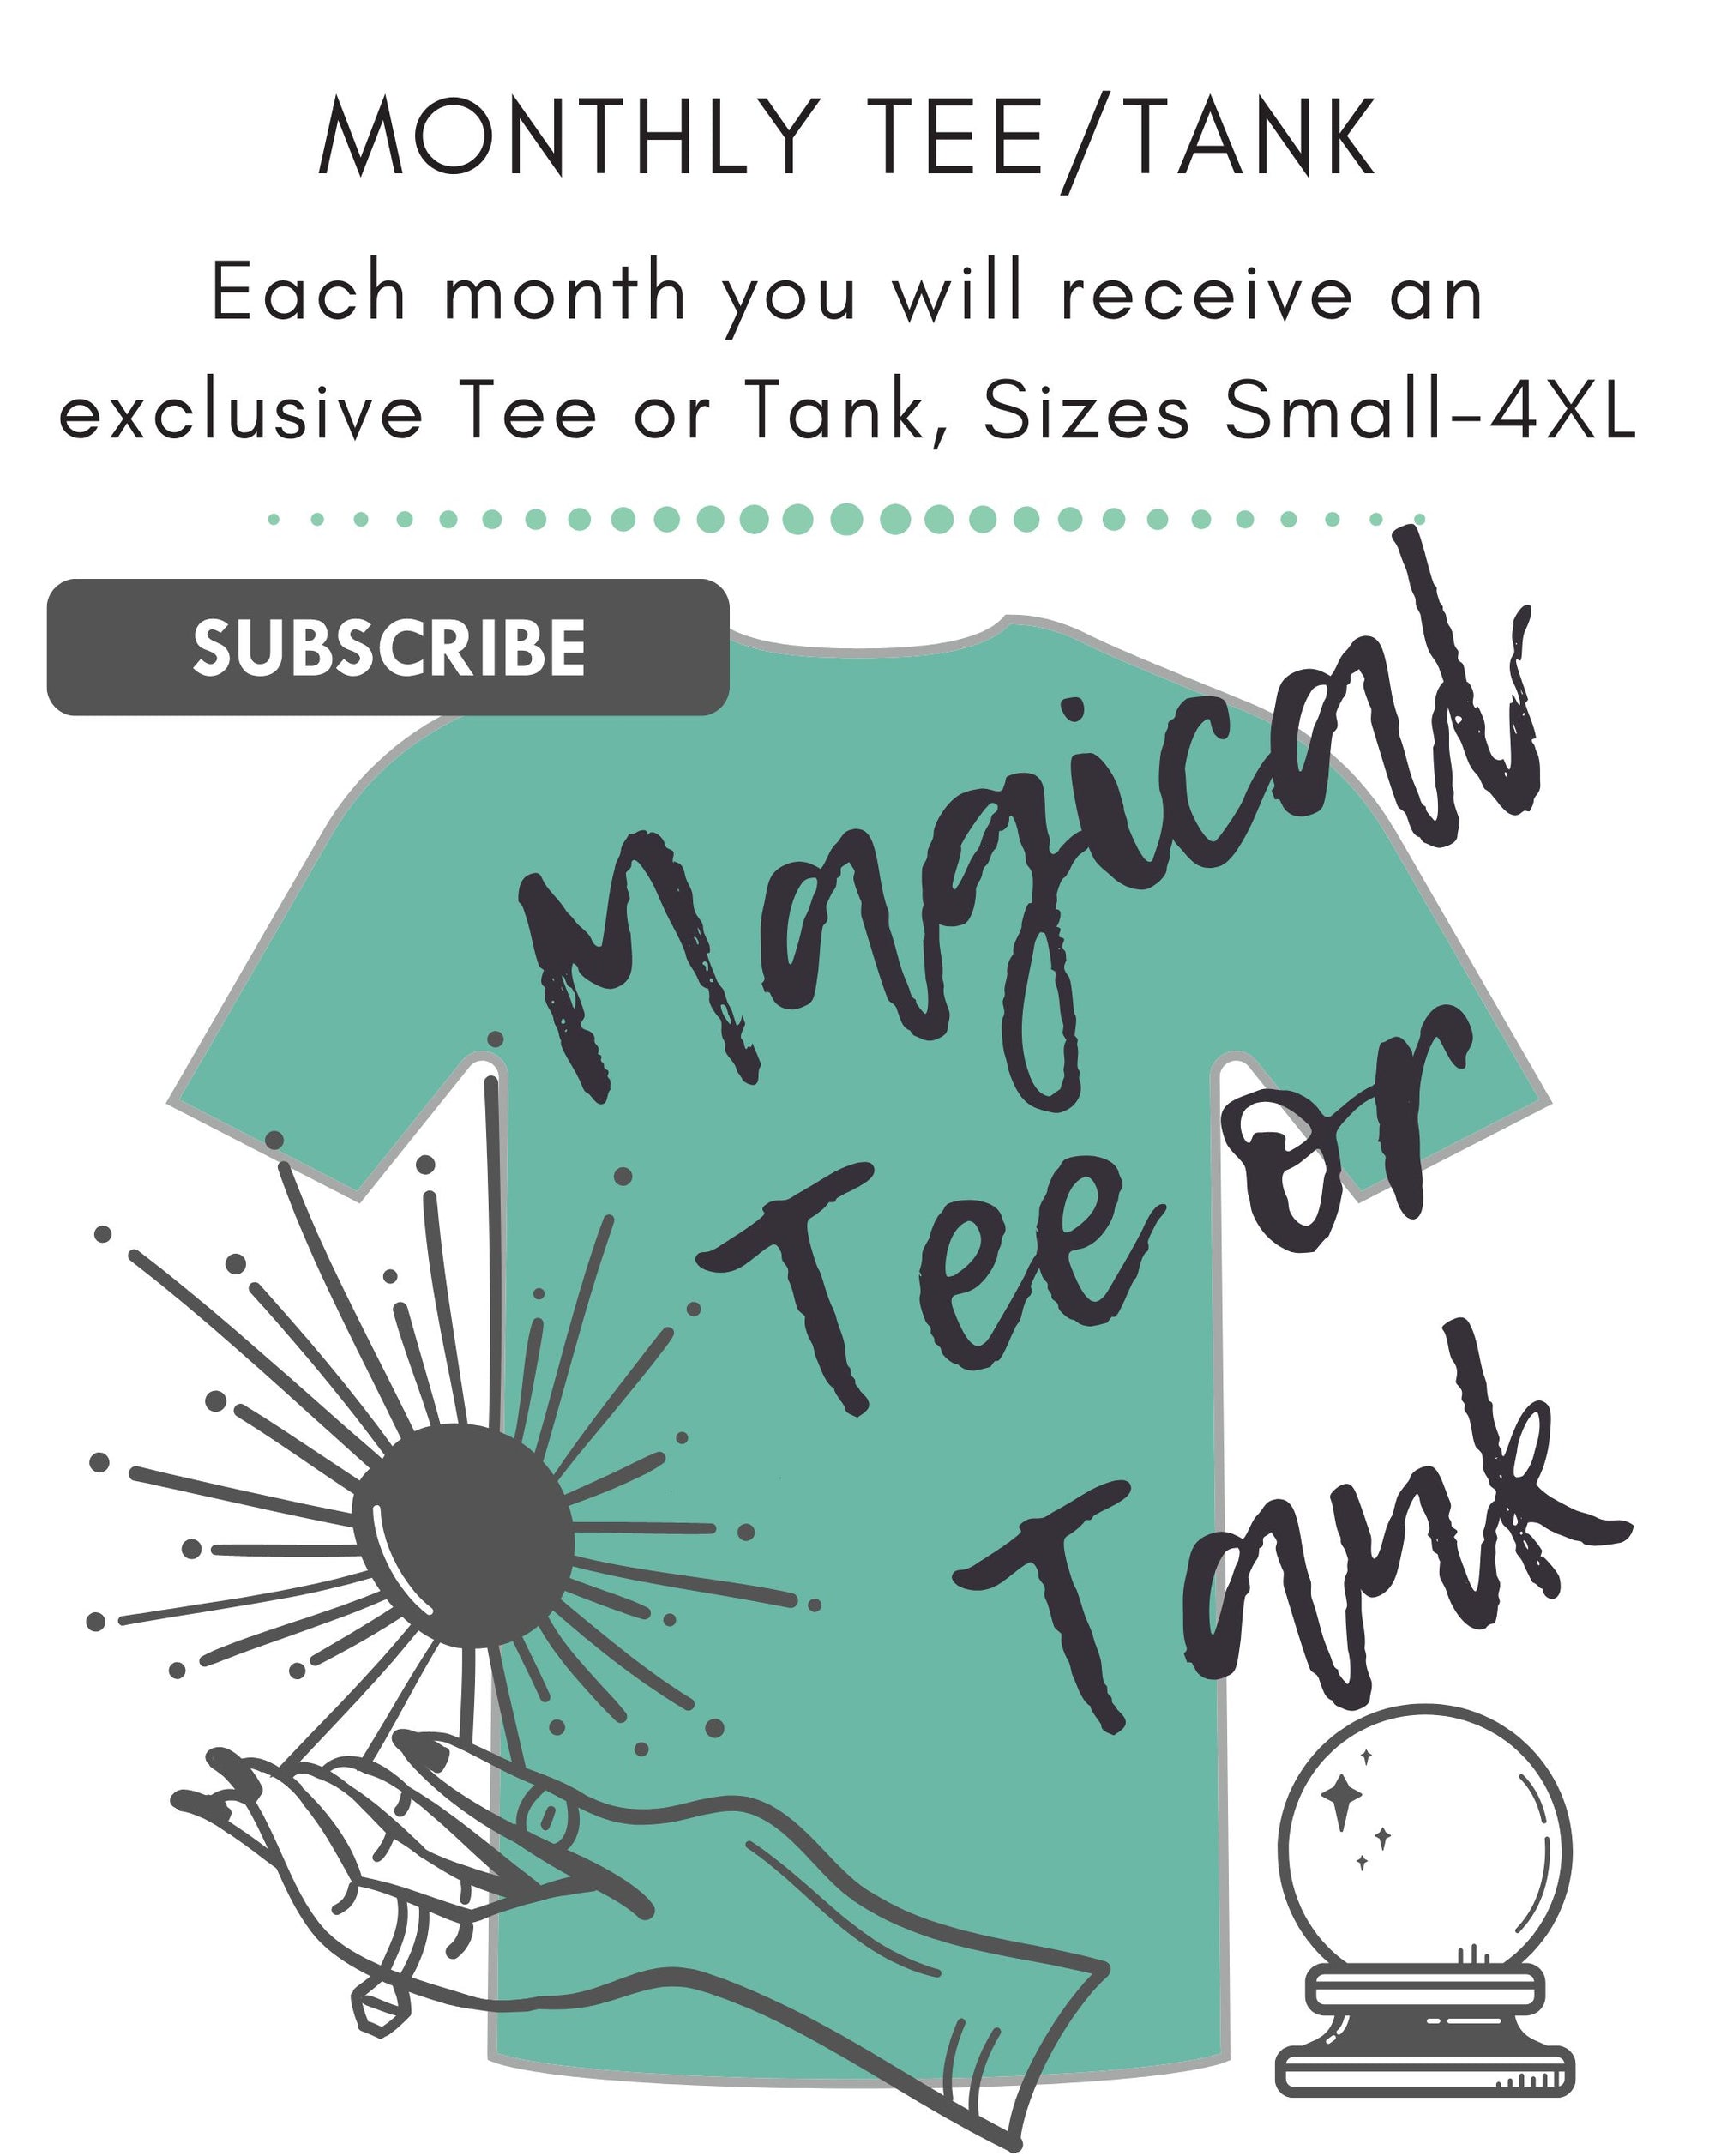 Saged & Stoned, Monthly Tee/Tank Subscription + Free Shipping!